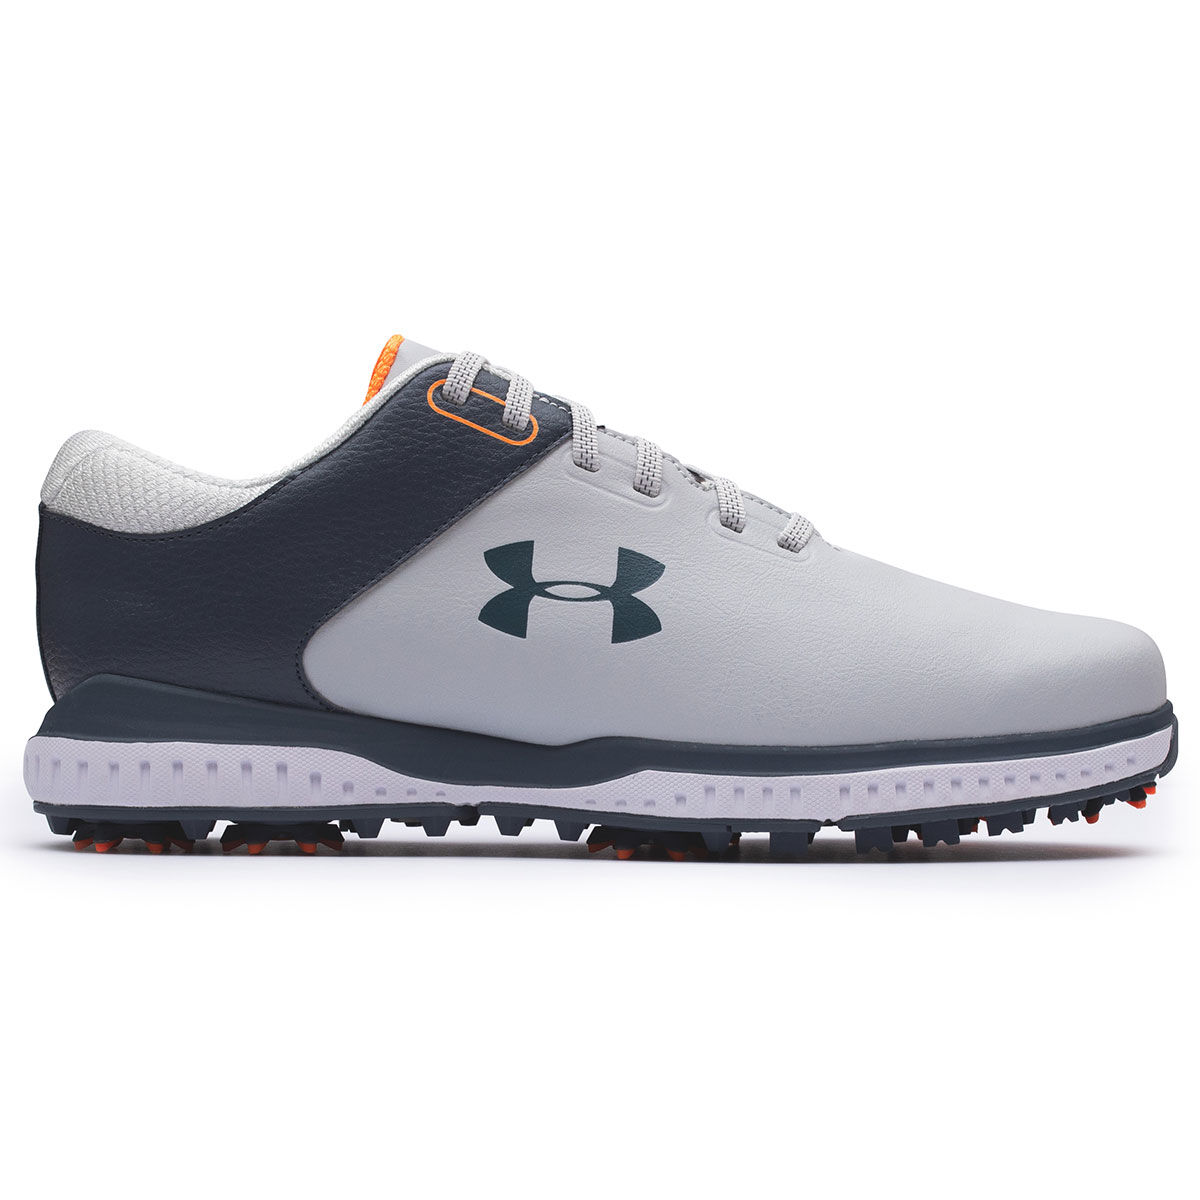 Under Armour Men’s Medal RST Waterproof Spiked Golf Shoes, Mens, Halo gray/downpour/downpour, 7 | American Golf